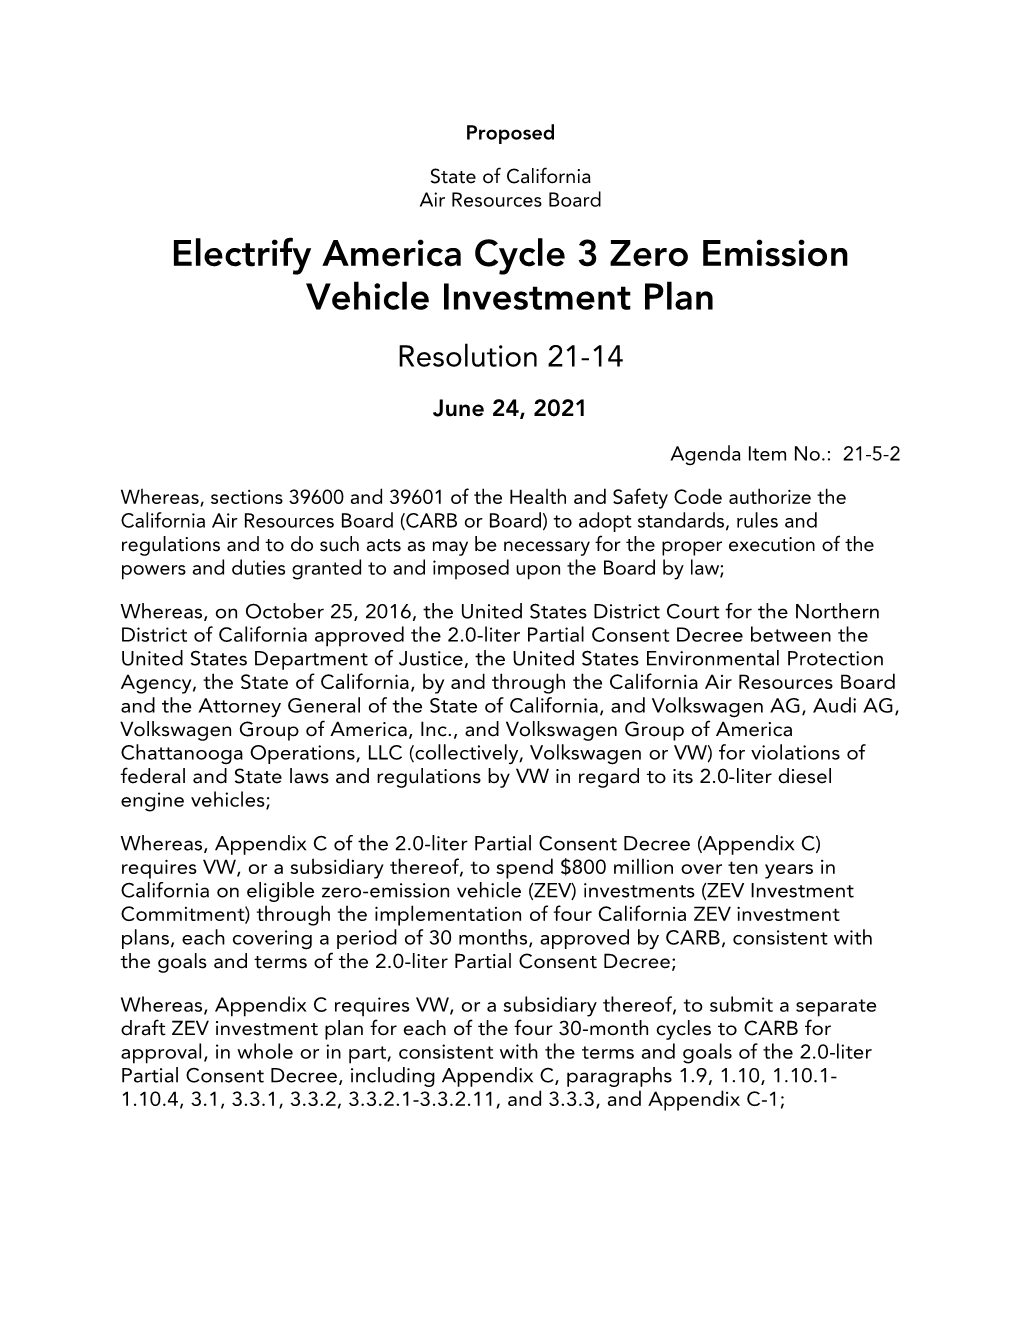 Proposed Resolution 21-14 Electrify America Cycle 3 Zero Emision